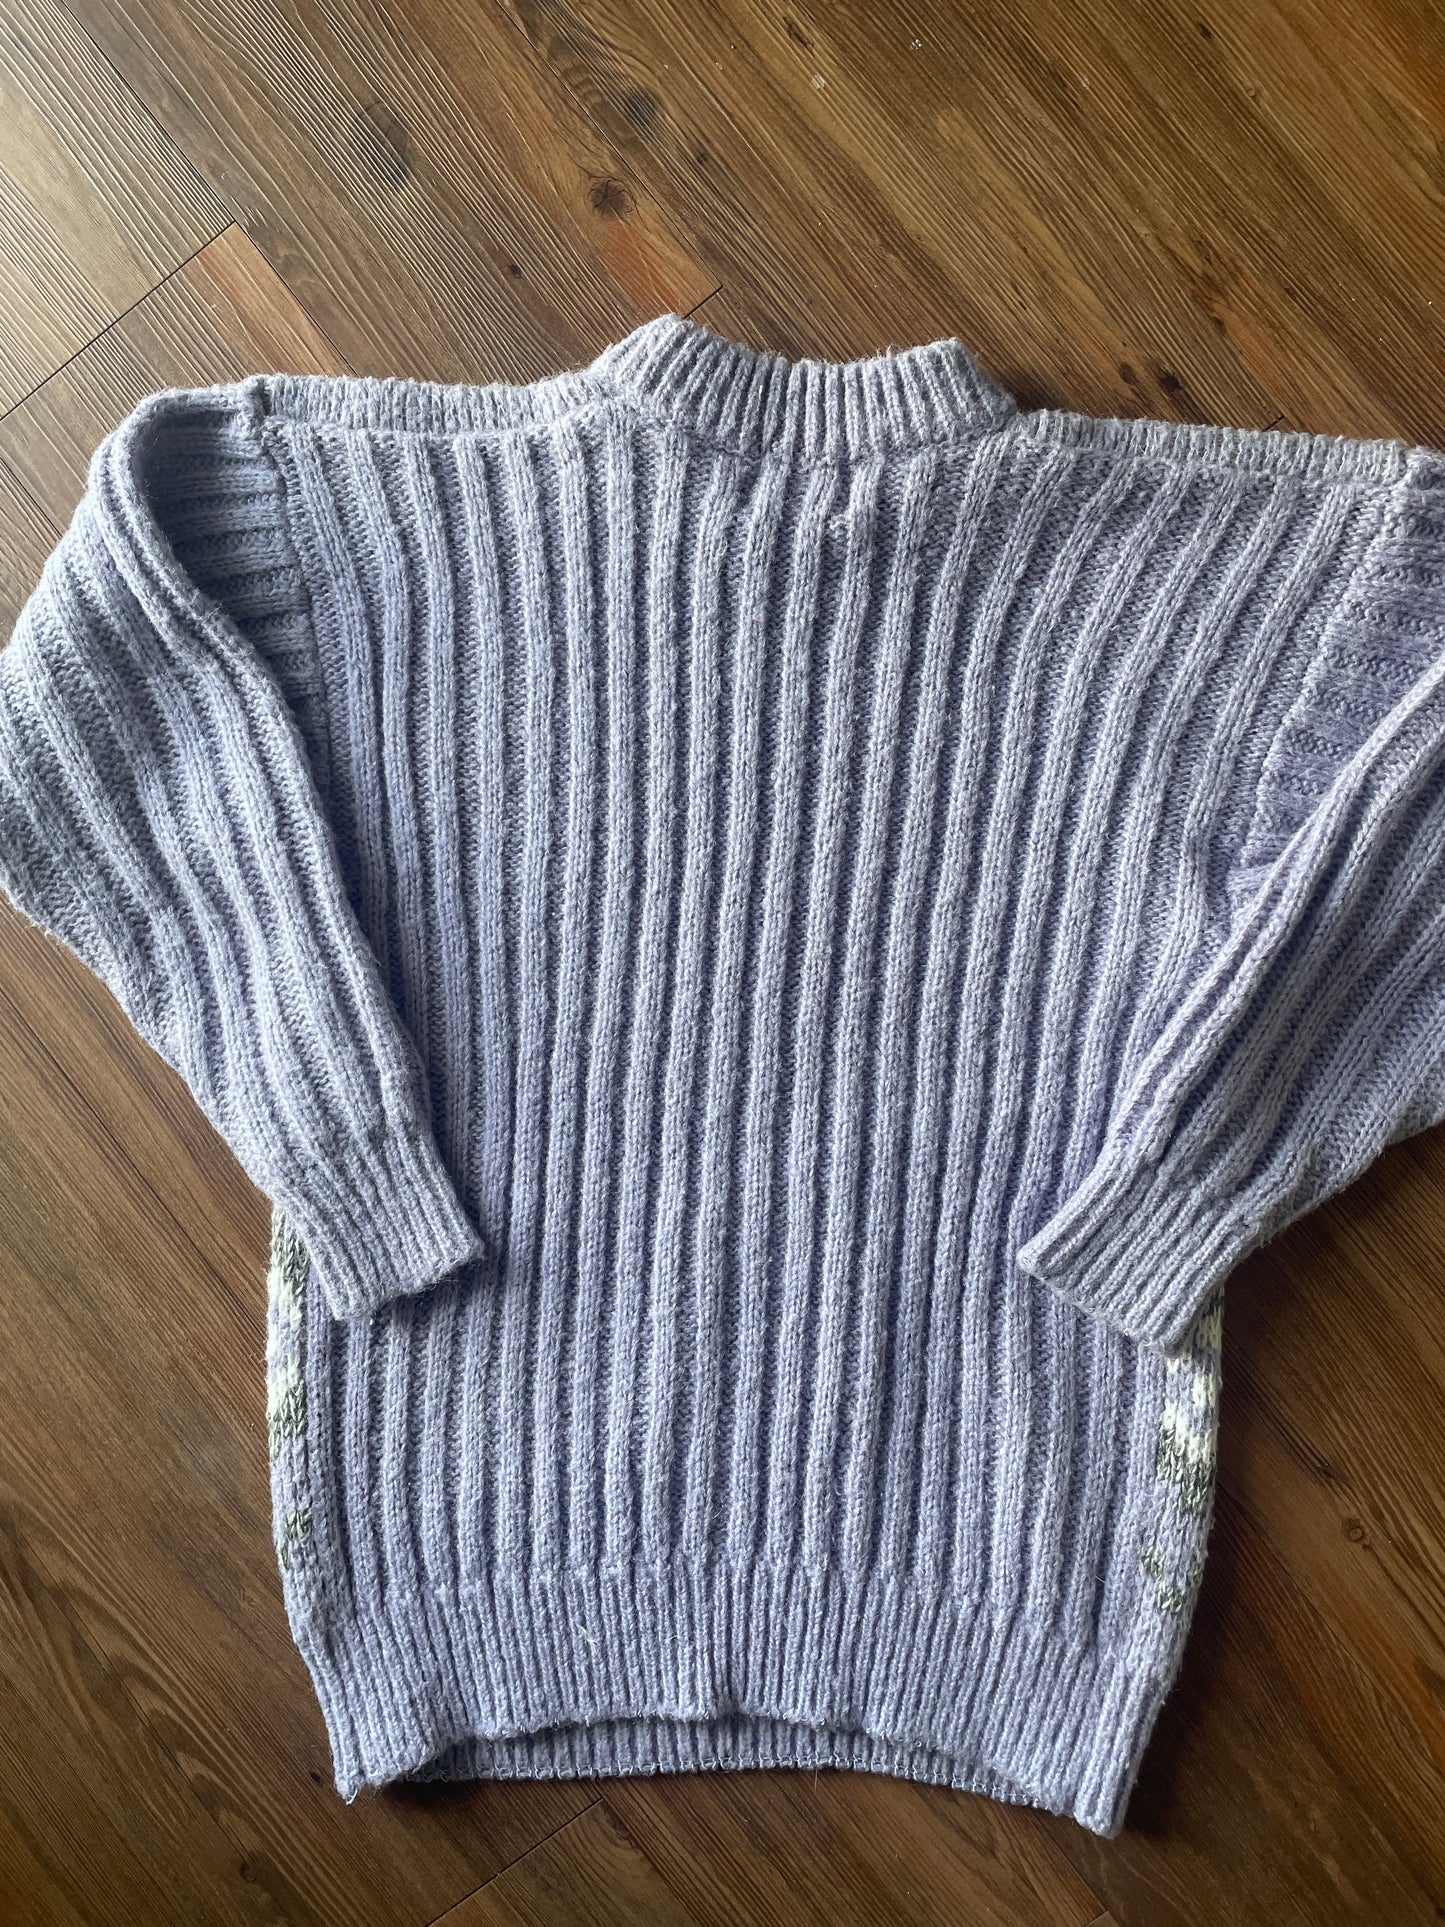 Medium Women’s Changes Vintage 80s Pastel Purple, Gray, and White Sweater